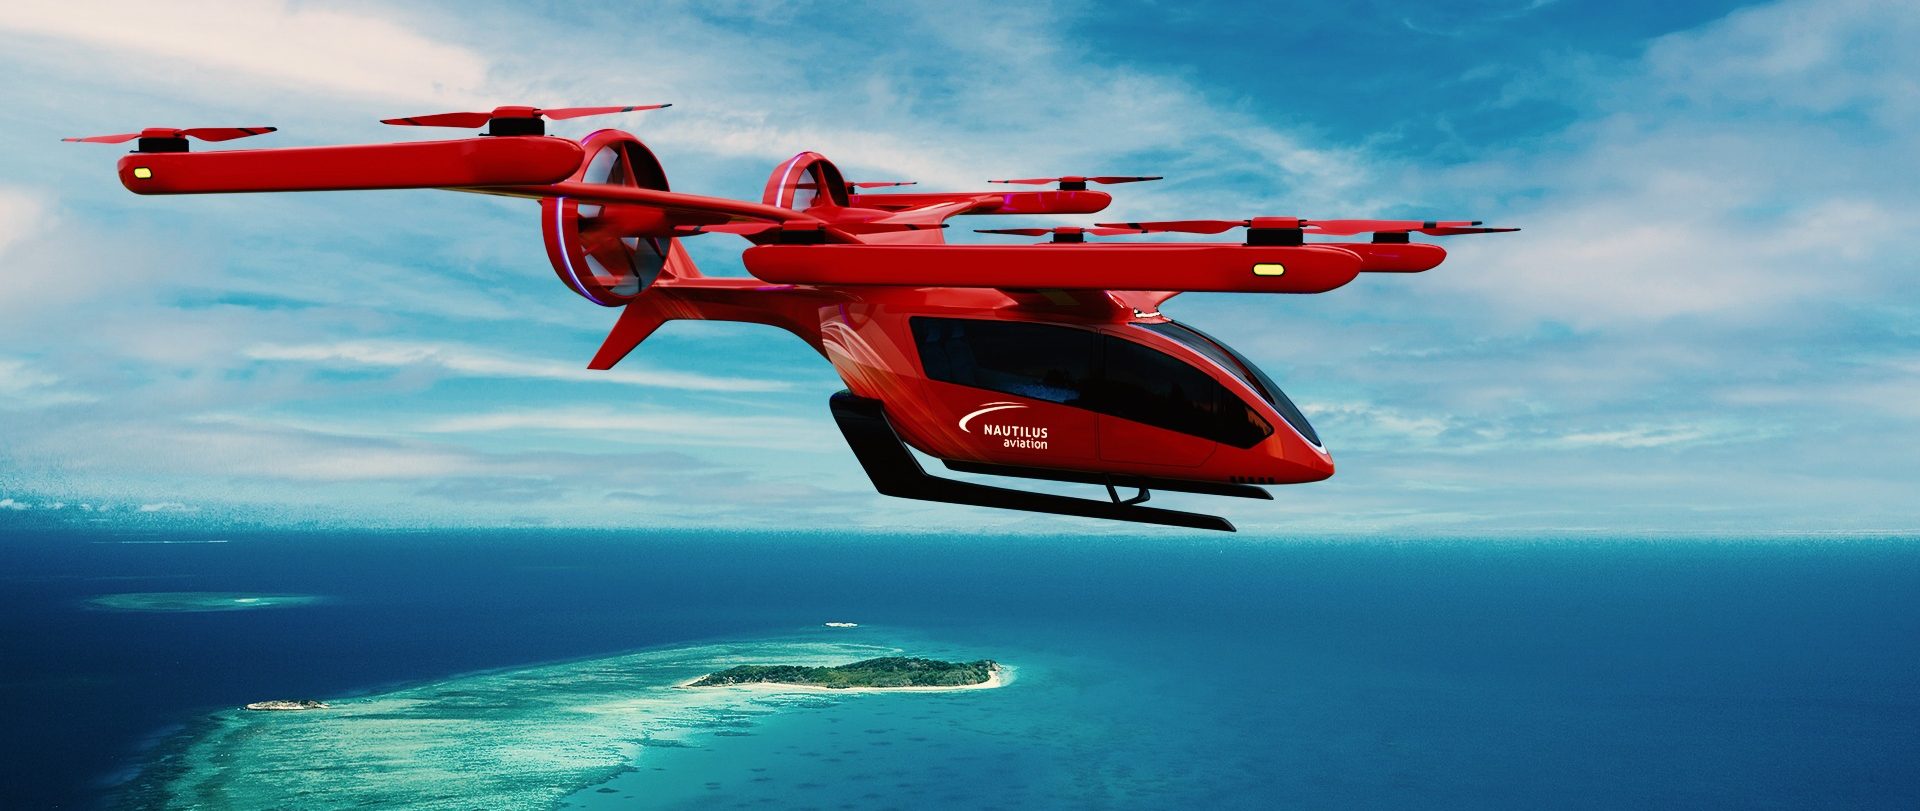 Eve and Nautilus Aviation partner to develop Urban Air Mobility operations in Australia